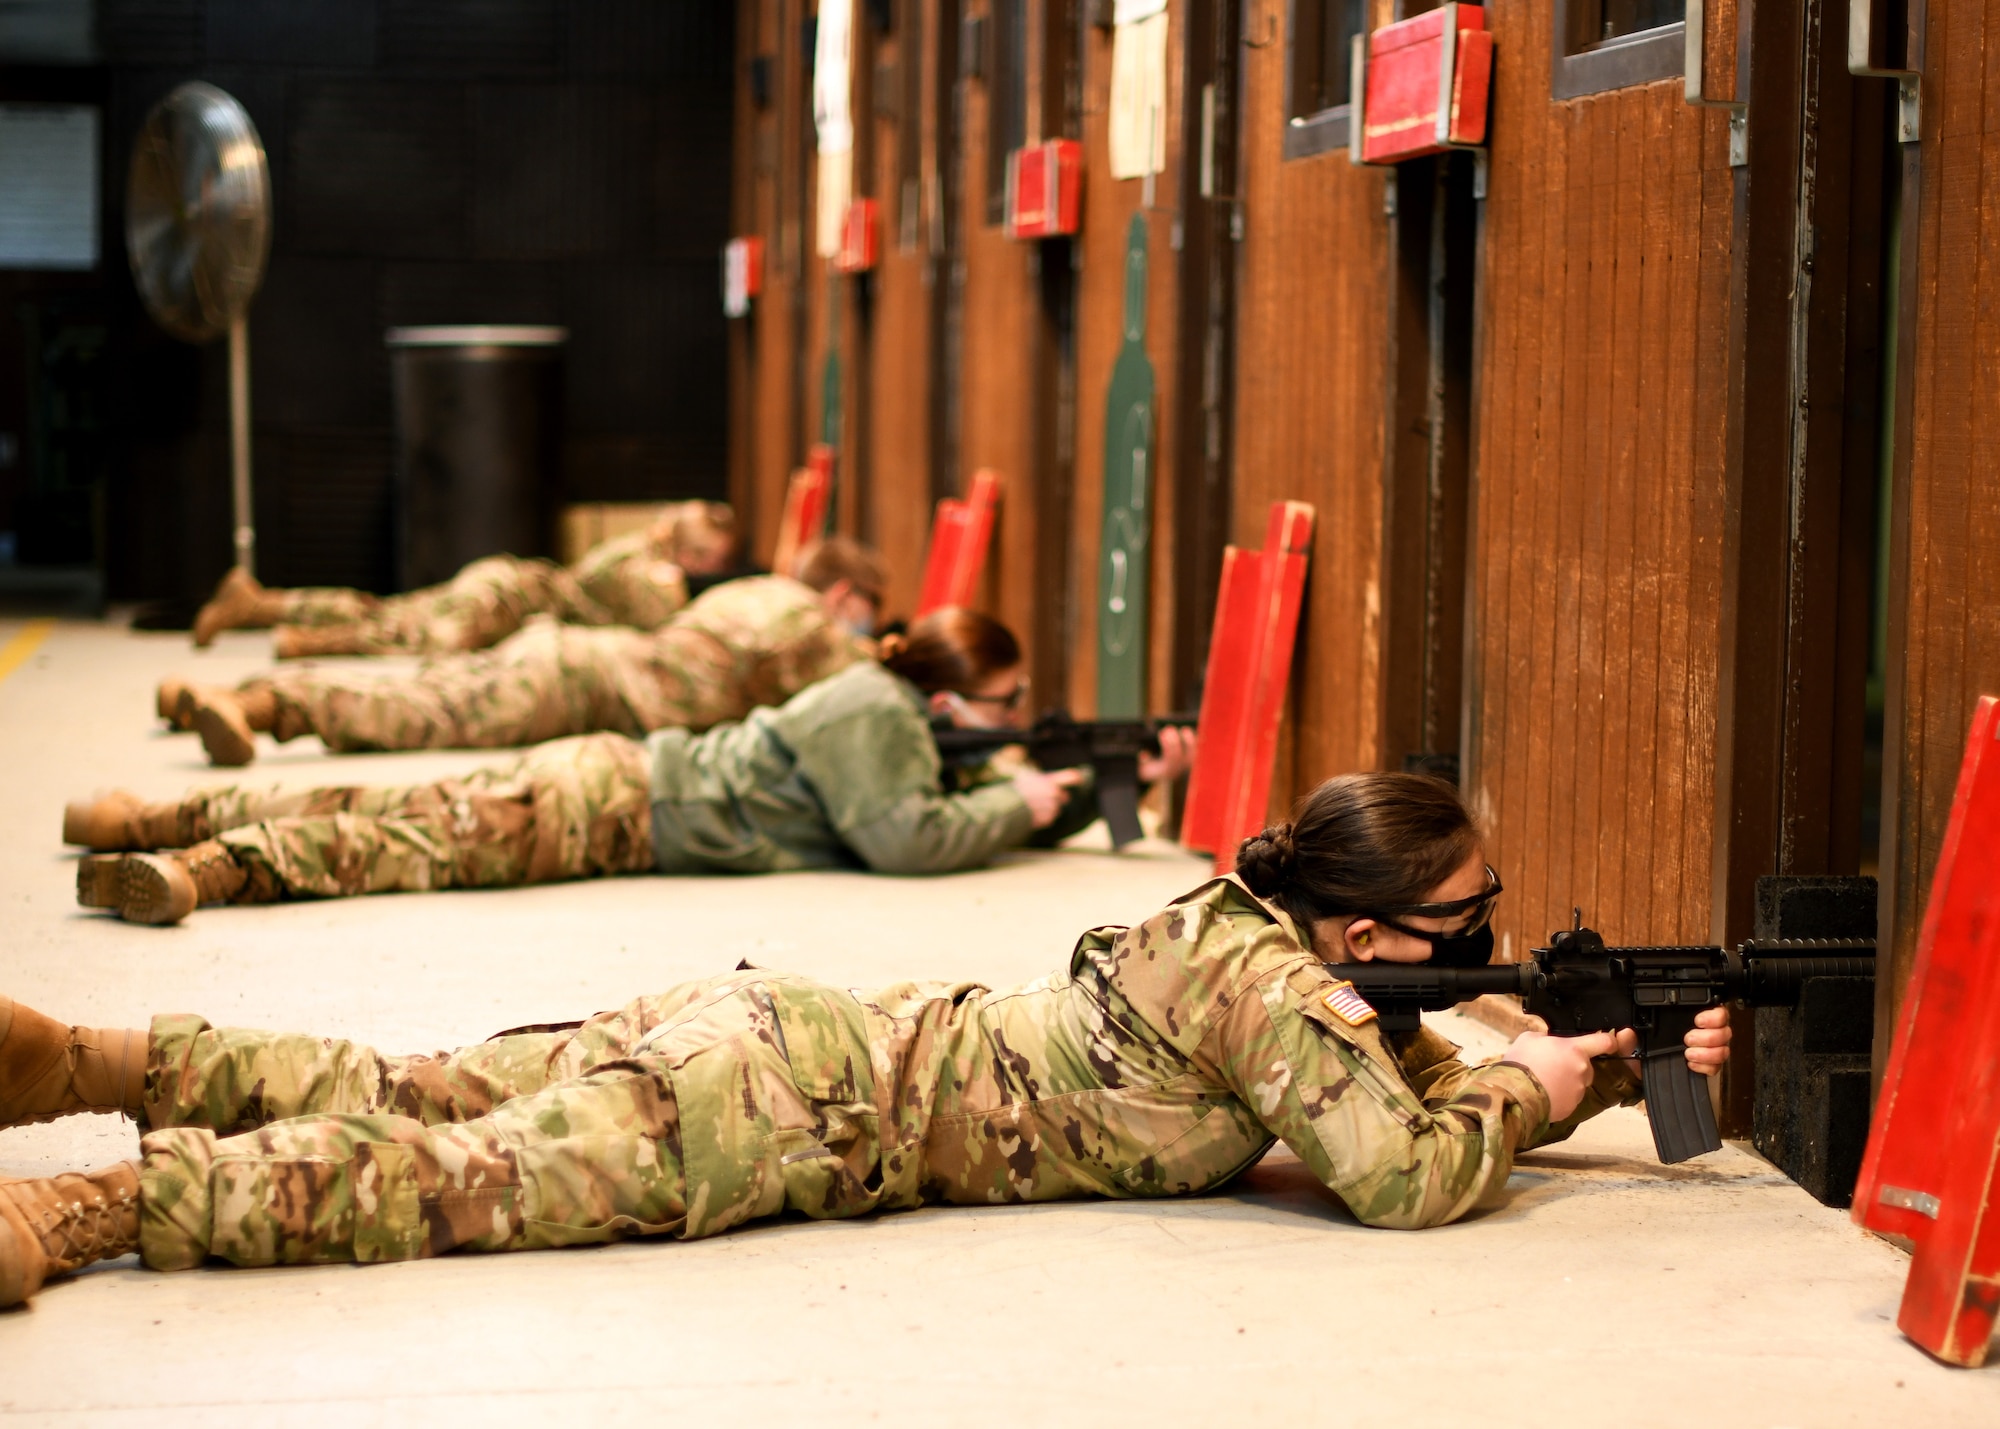 University of North Dakota Army Reserve Officer Training Corps cadets fire M4A1 carbines from the prone supported position during weapons familiarization training on Grand Forks Air Force Base, N.D., Oct. 24, 2020. The 319th Security Forces Squadron provided a full day of range access for the cadets to complete weapons training in order to maintain their annual training requirement. (U.S. Air Force photo by Staff Sgt. Patrick A. Wyatt)